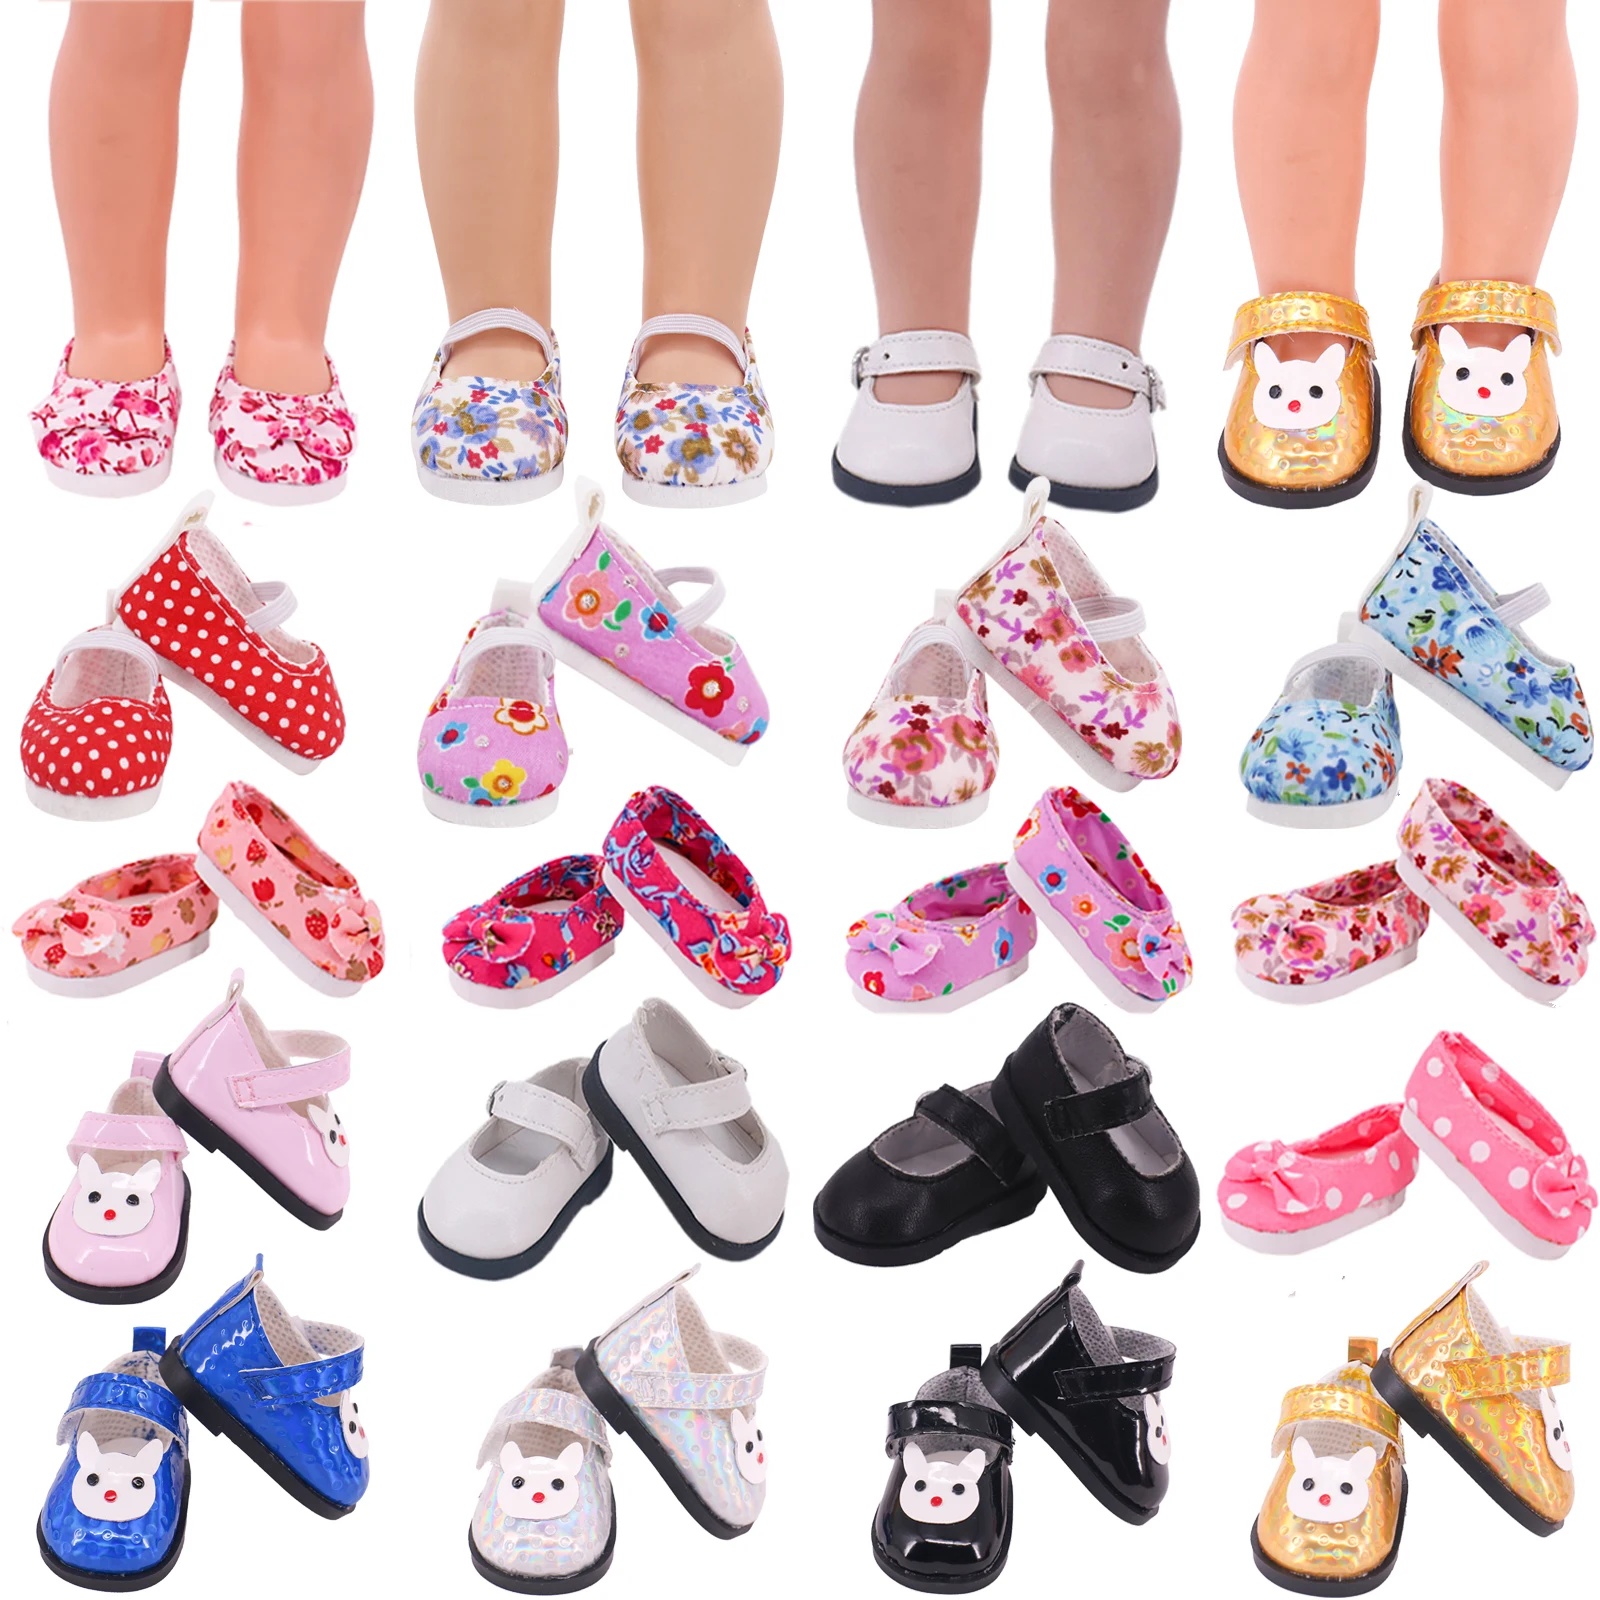 Cute 5Cm Doll Shoes Paola Reina Wellie Wisher Floral&Pu Shoes For 14.5 Inch Doll&EXO&Blythe Doll Accessories Girl DIY Toys doll shoes 5cm multicolor leather shoes for 14 inch wellie wisher